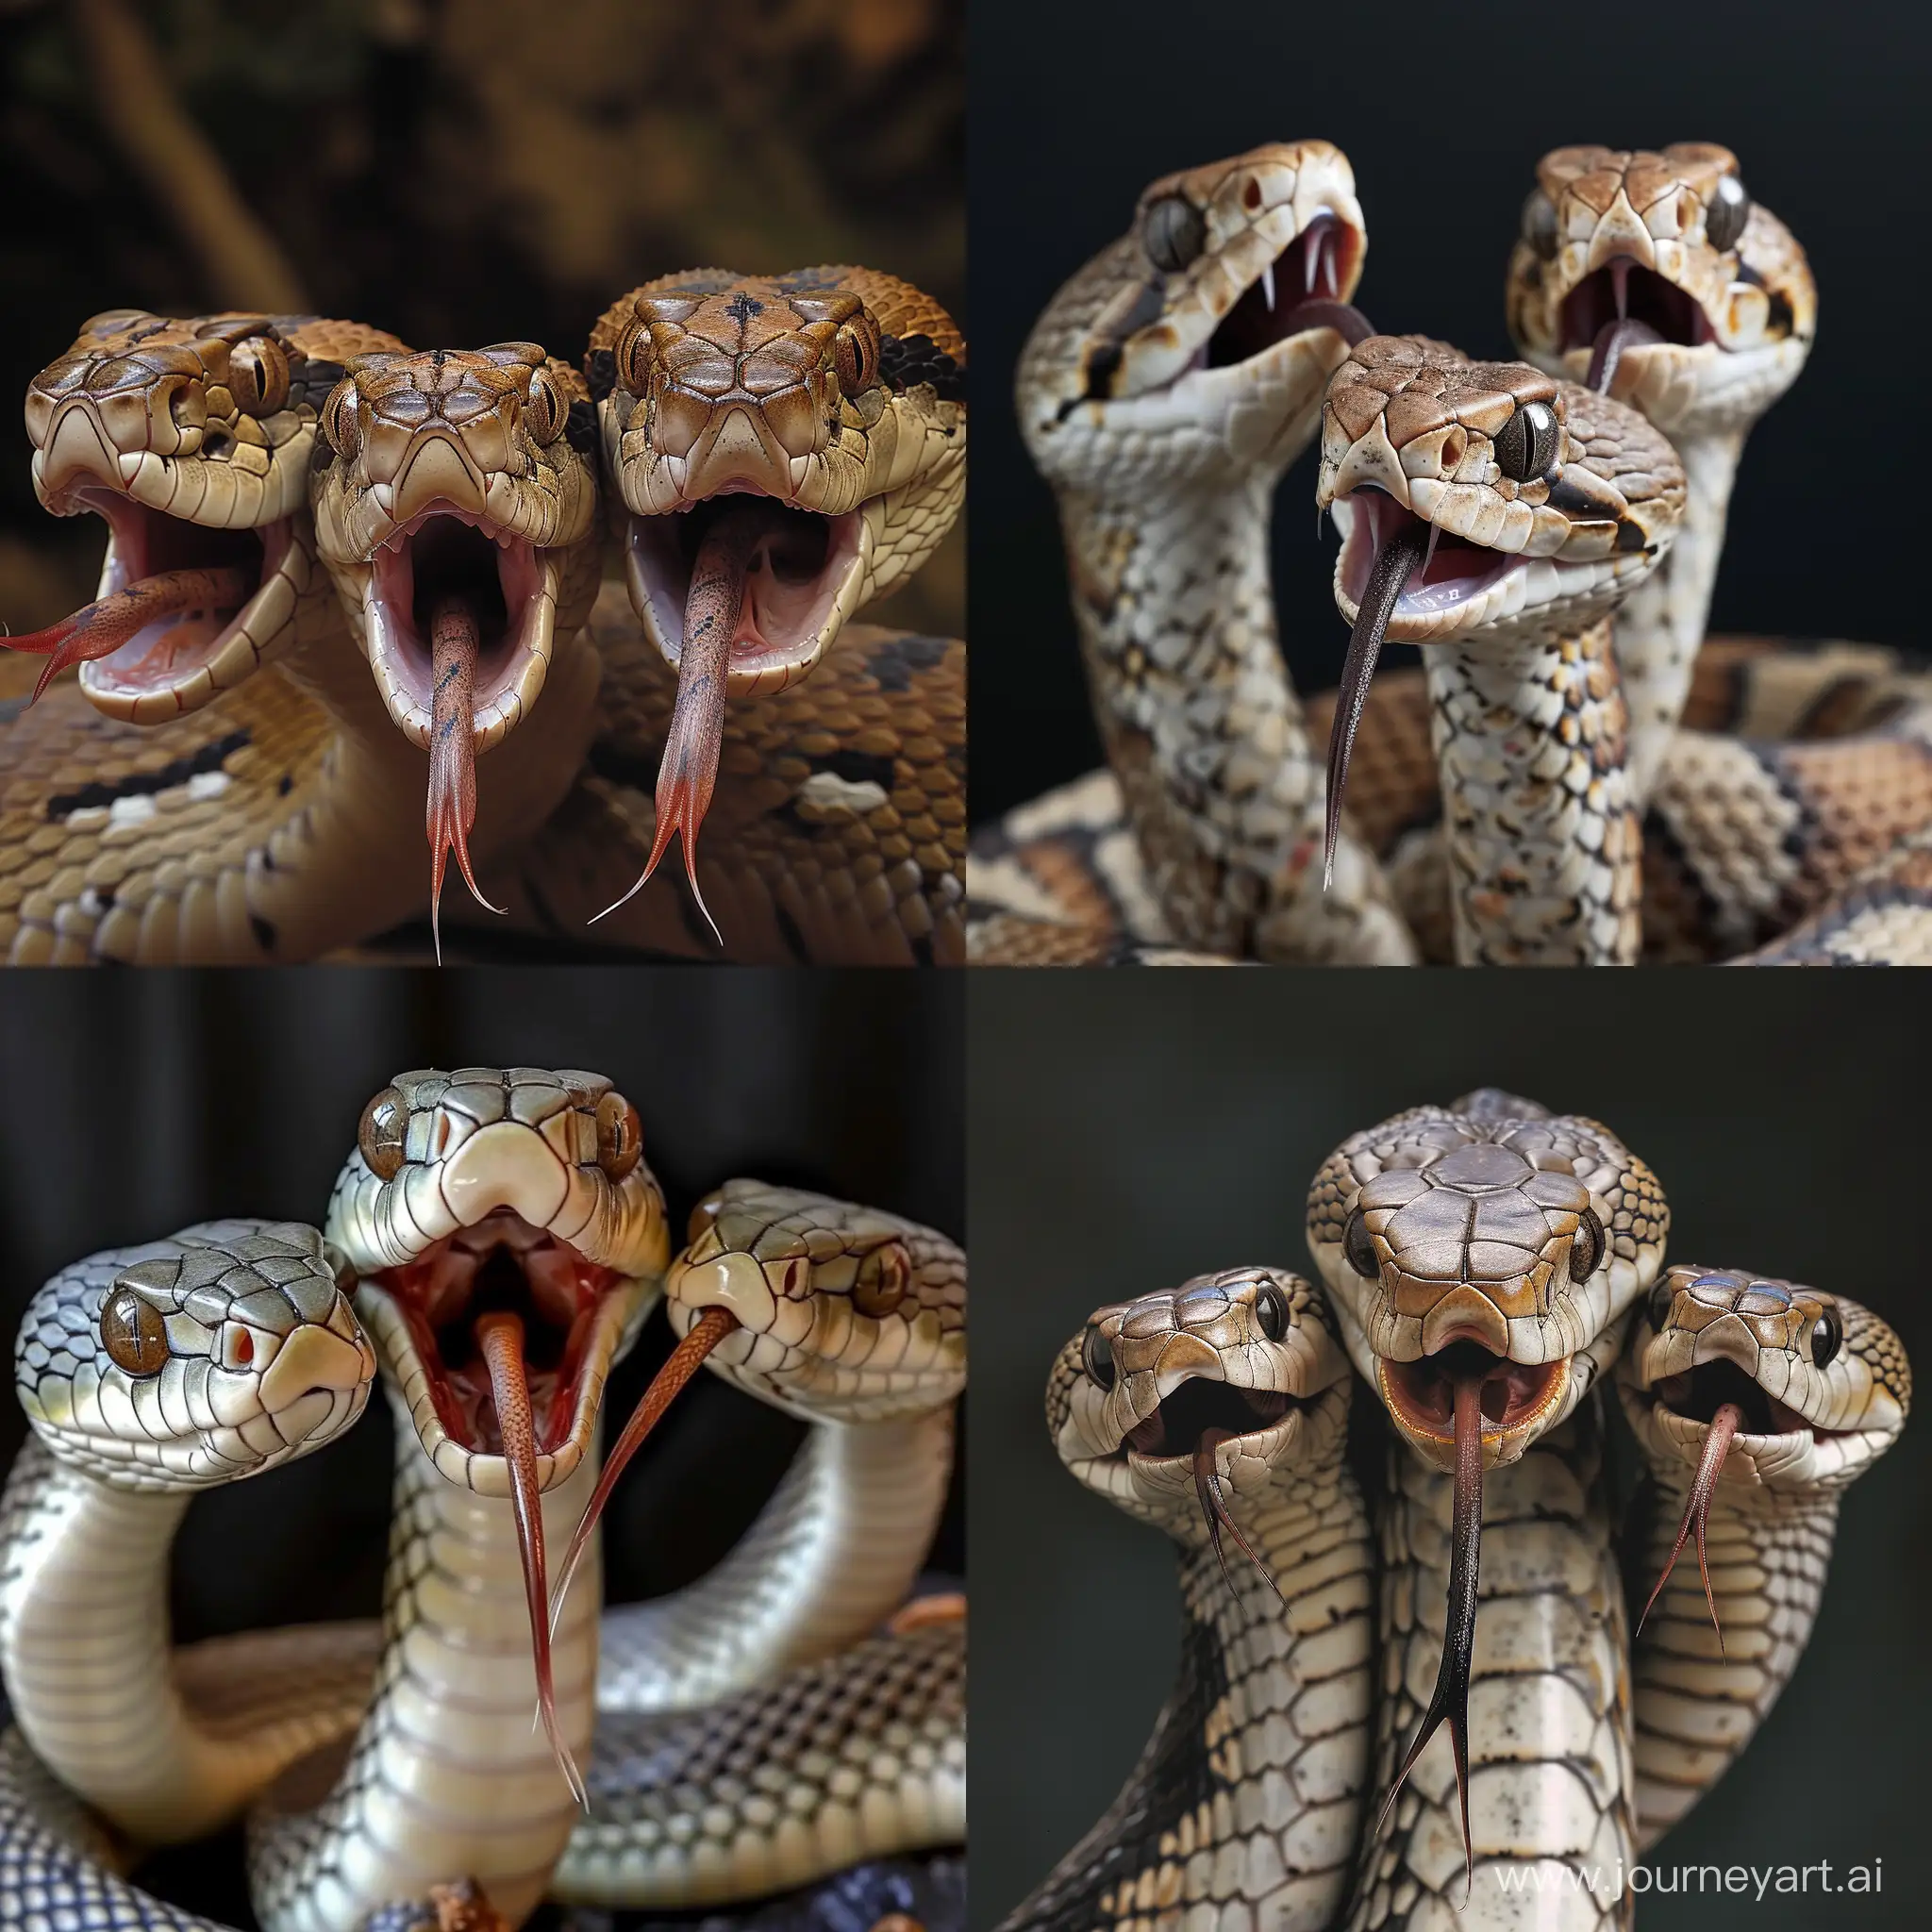 A snake with 3 heads and 5 tongues